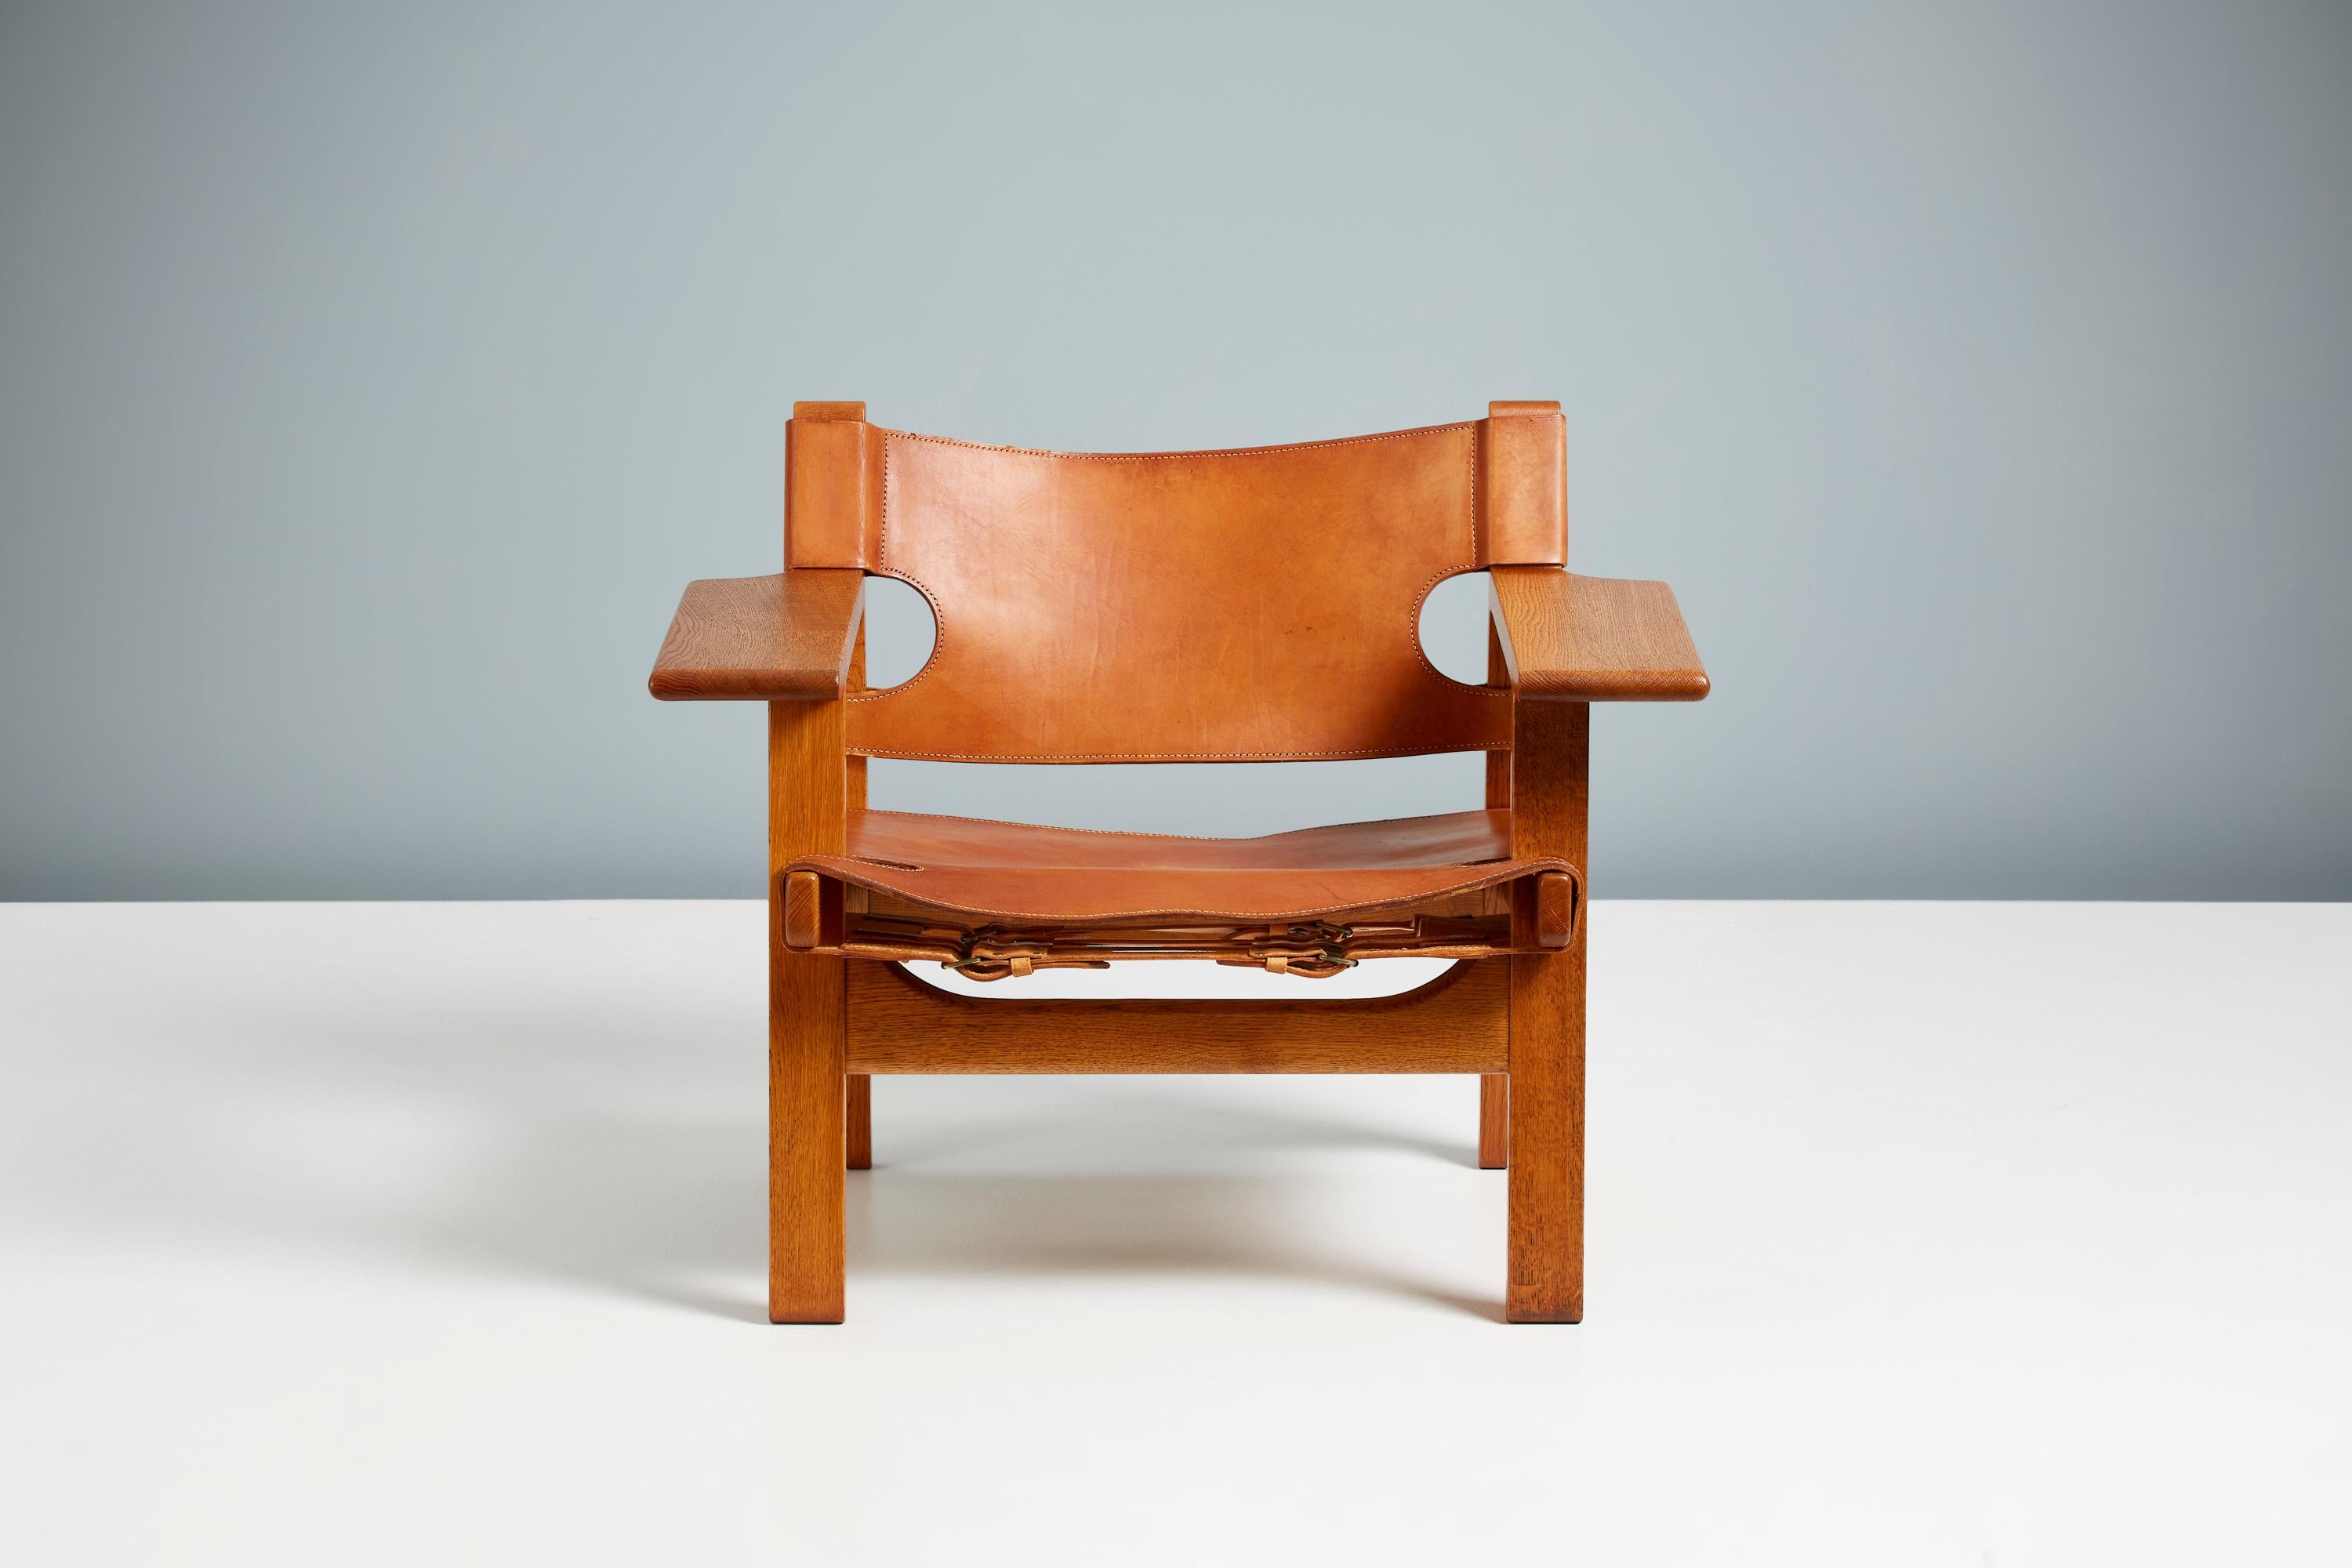 Børge Mogensen

The Spanish Chair, circa 1958

Manufactured by Fredericia Stolefabrik, Copenhagen, Denmark. Solid oak frame with original, patinated tan saddle leather seat and back and brass fittings. This example produced in the 1960s. Minor